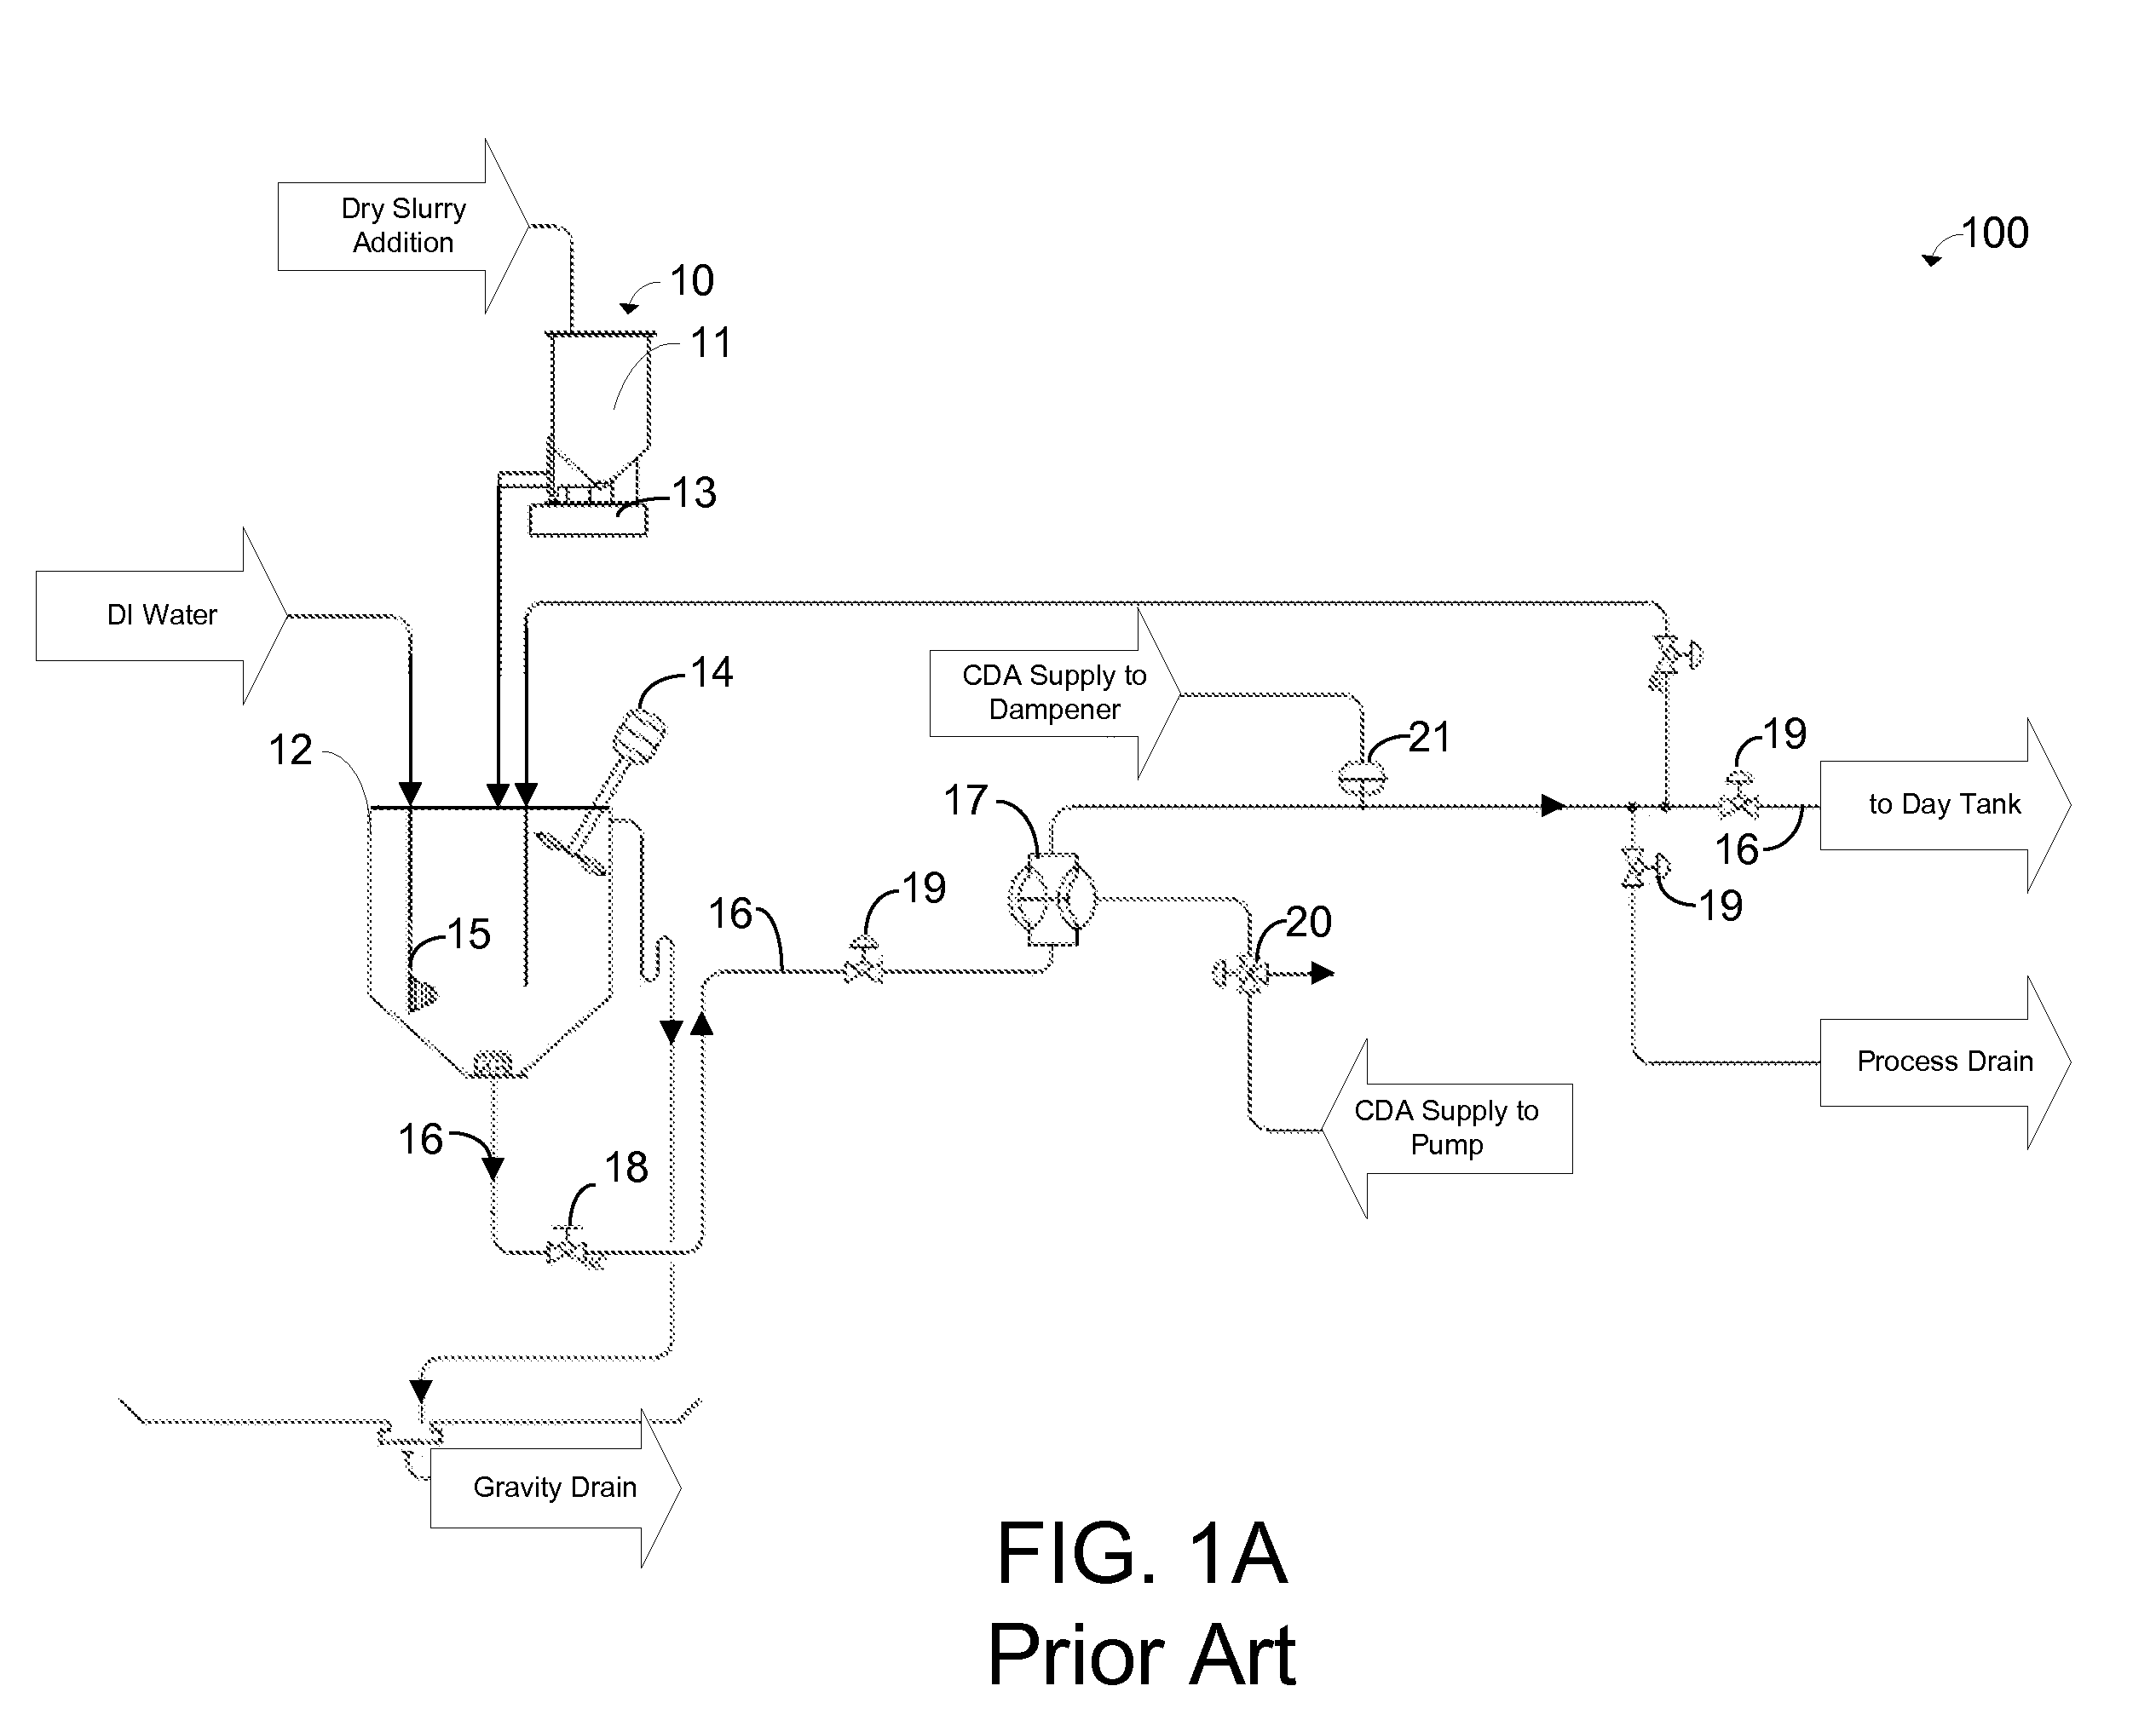 Method and apparatus for blending process materials